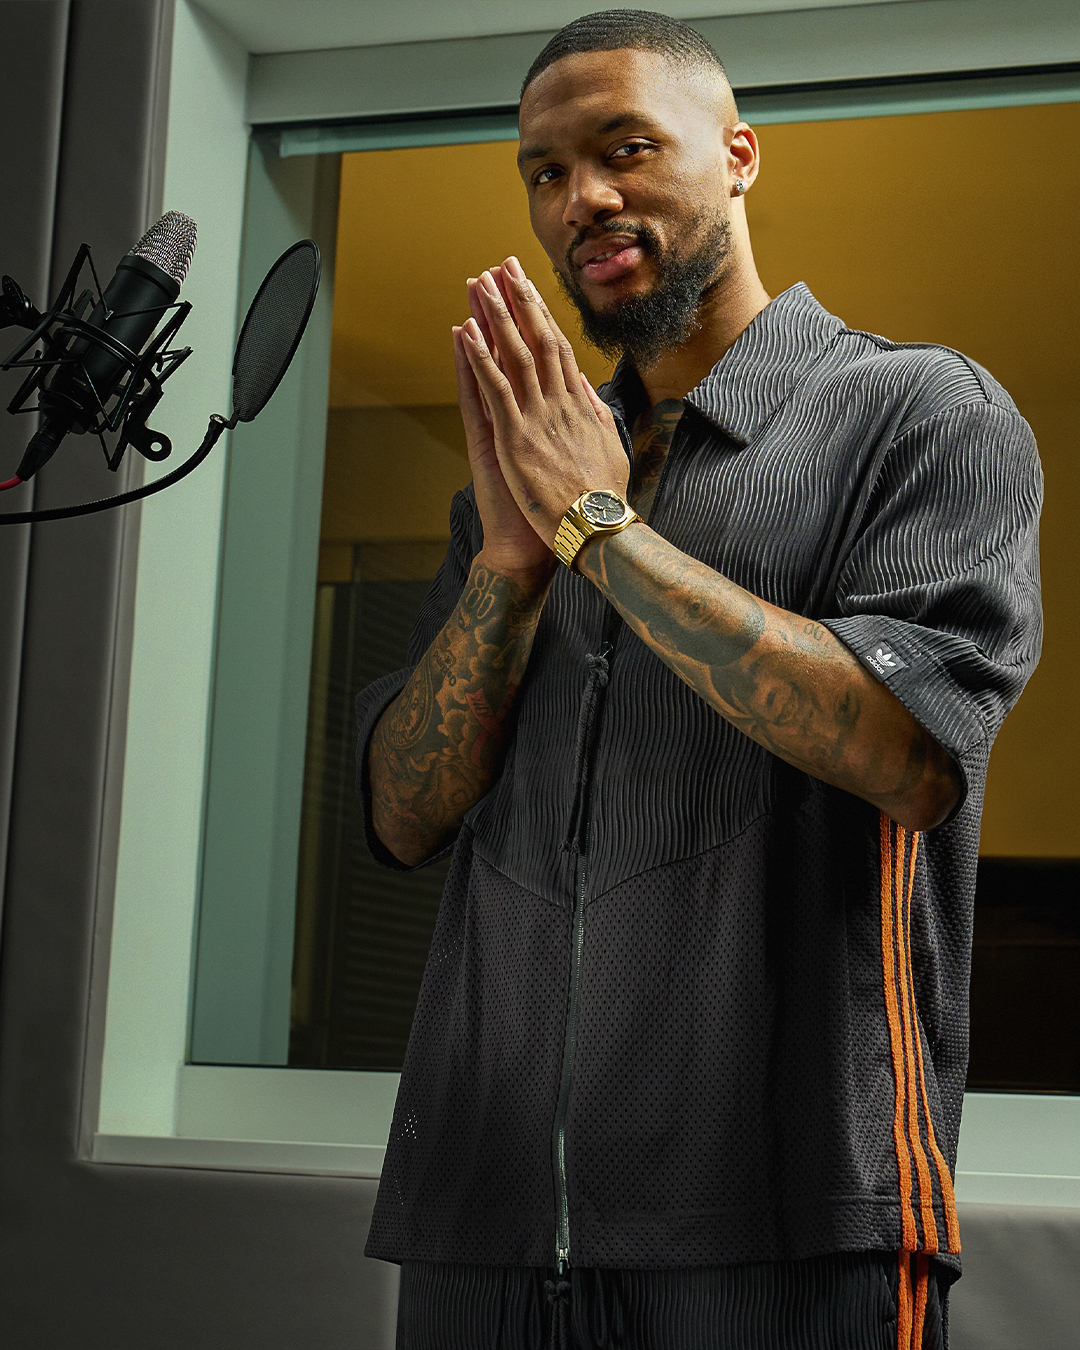 Man in a studio with tattoos visible, standing by a microphone, hands pressed together